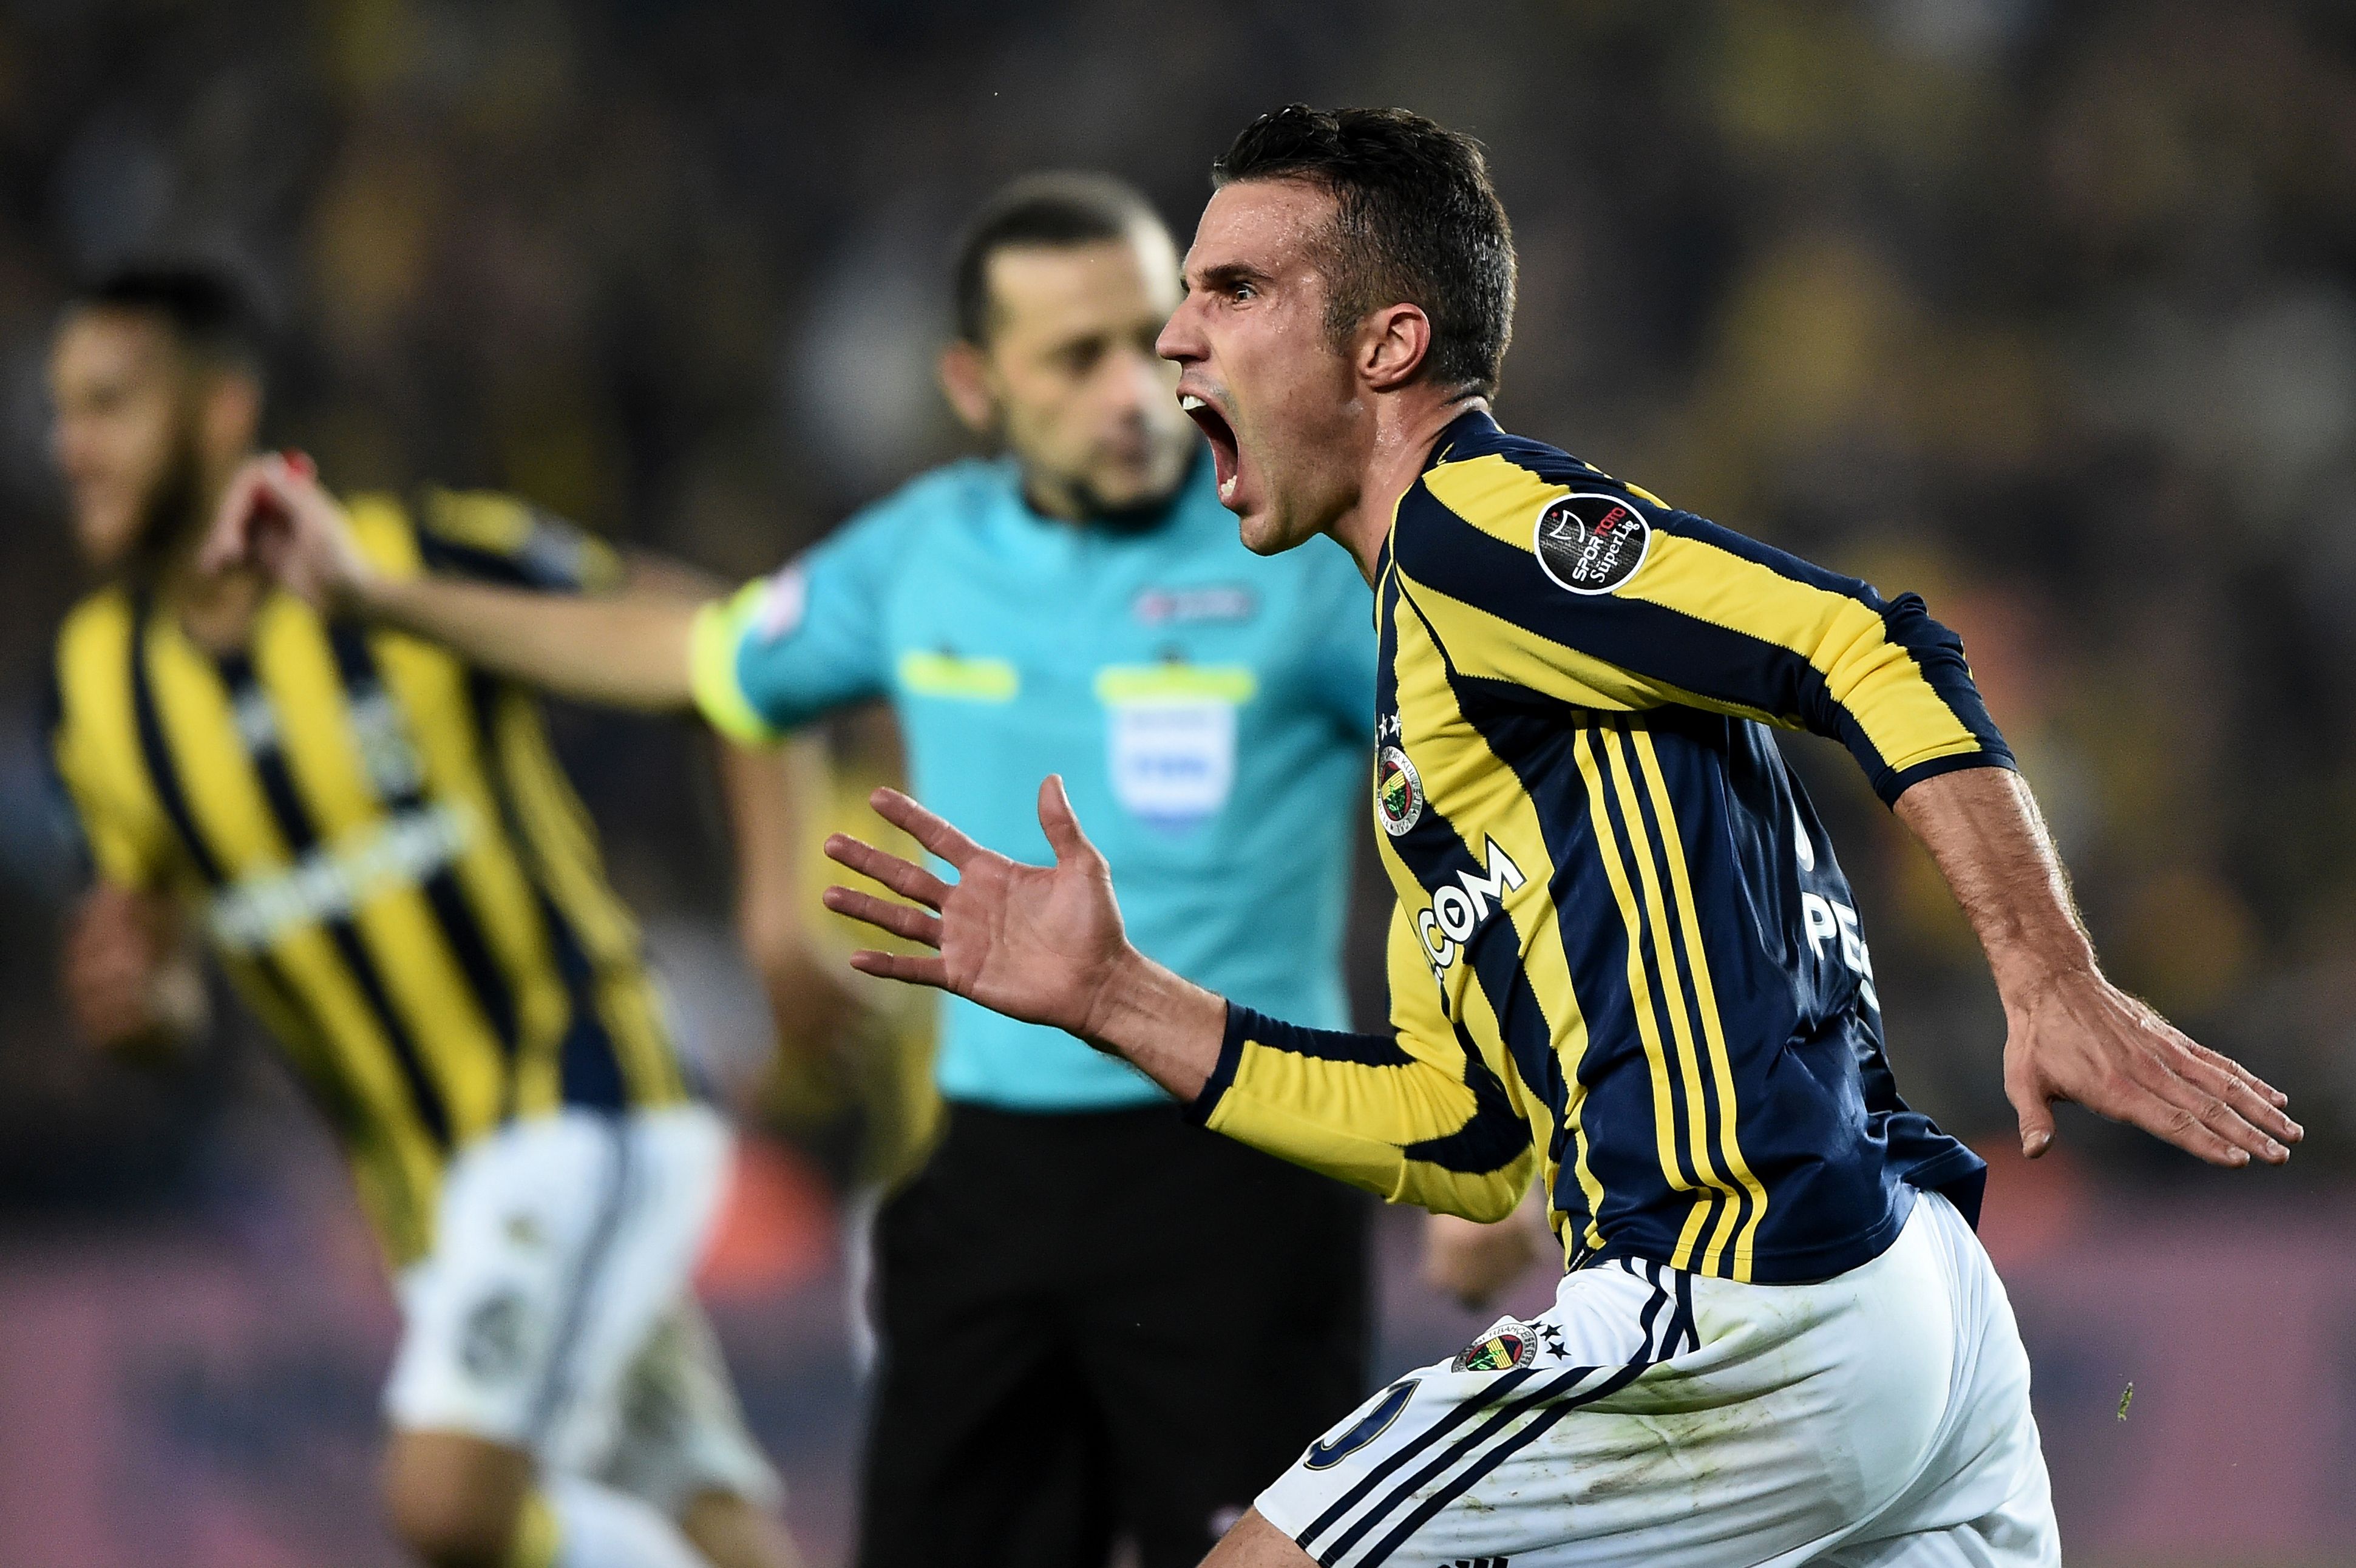 Fenerbahce's Dutch forward Robin Van Persie (R) celebrates after scoring a goal during the Turkish Spor Toto Super Lig football match between Fenerbahce and Galatasaray at the Fenerbahce Ulker Sukru Saracoglu stadium in Istanbul on November 20, 2016.  / AFP / OZAN KOSE        (Photo credit should read OZAN KOSE/AFP/Getty Images)